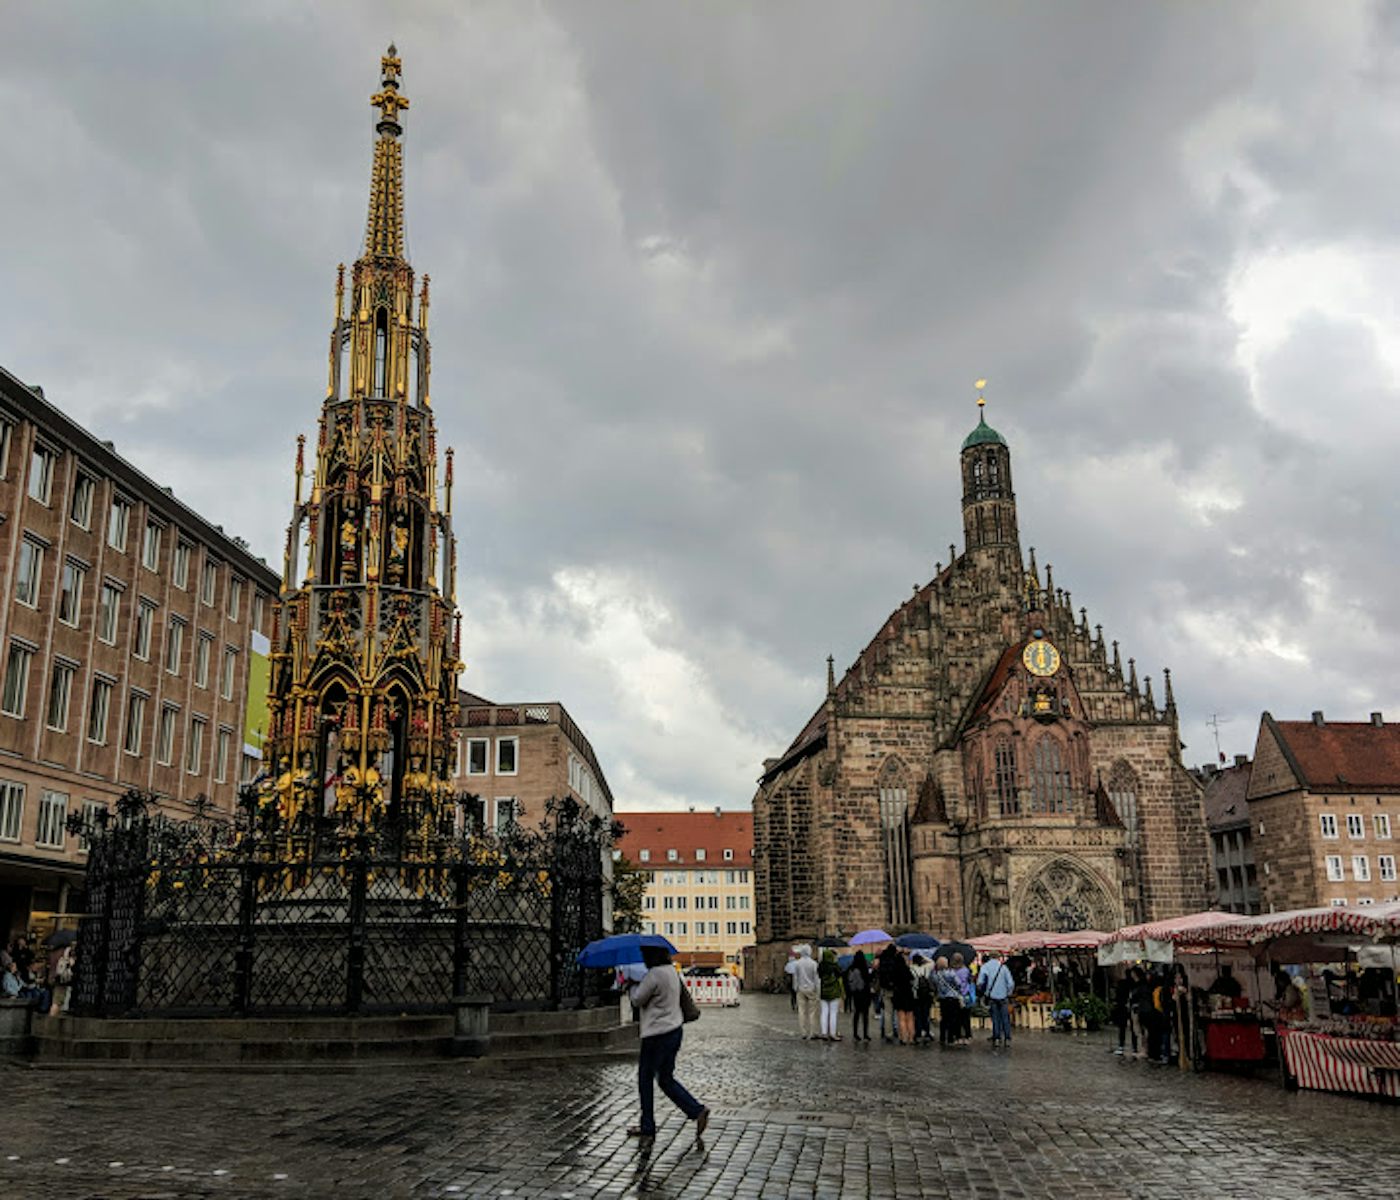 The Beautiful Fountain and Church of our Lady in Nuremberg